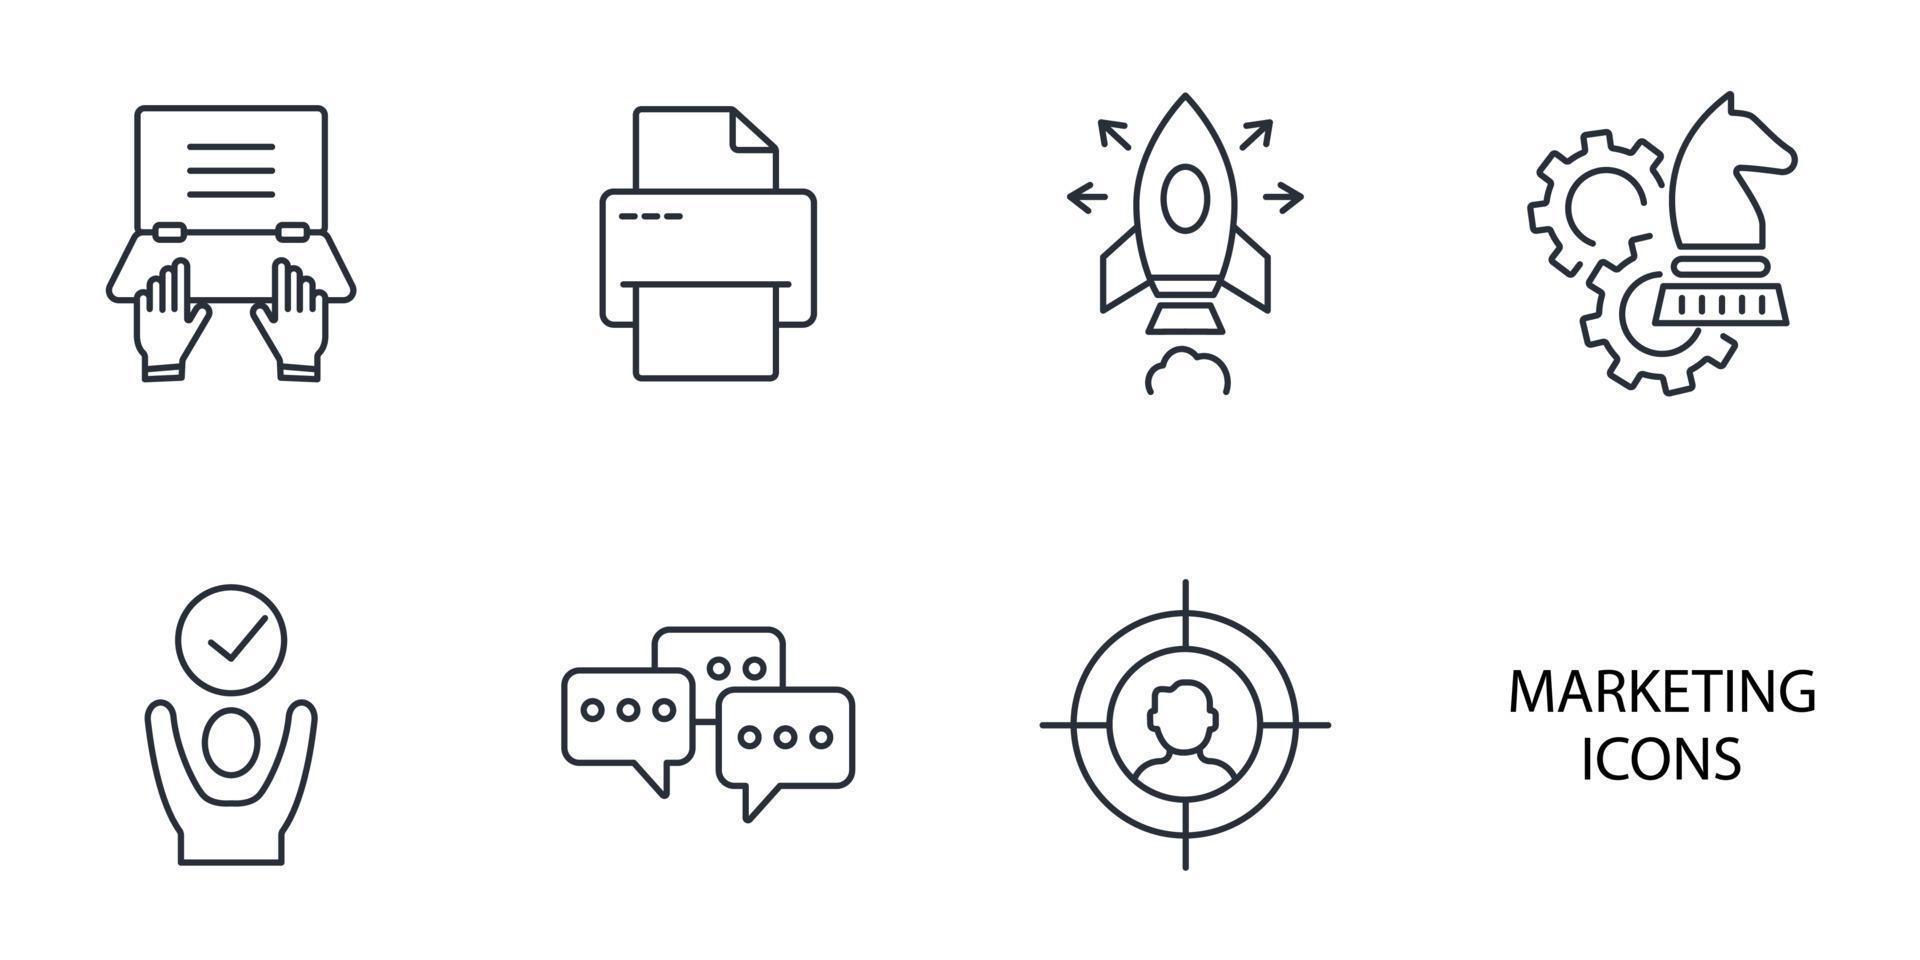 marketing icons set . marketing pack symbol vector elements for infographic web